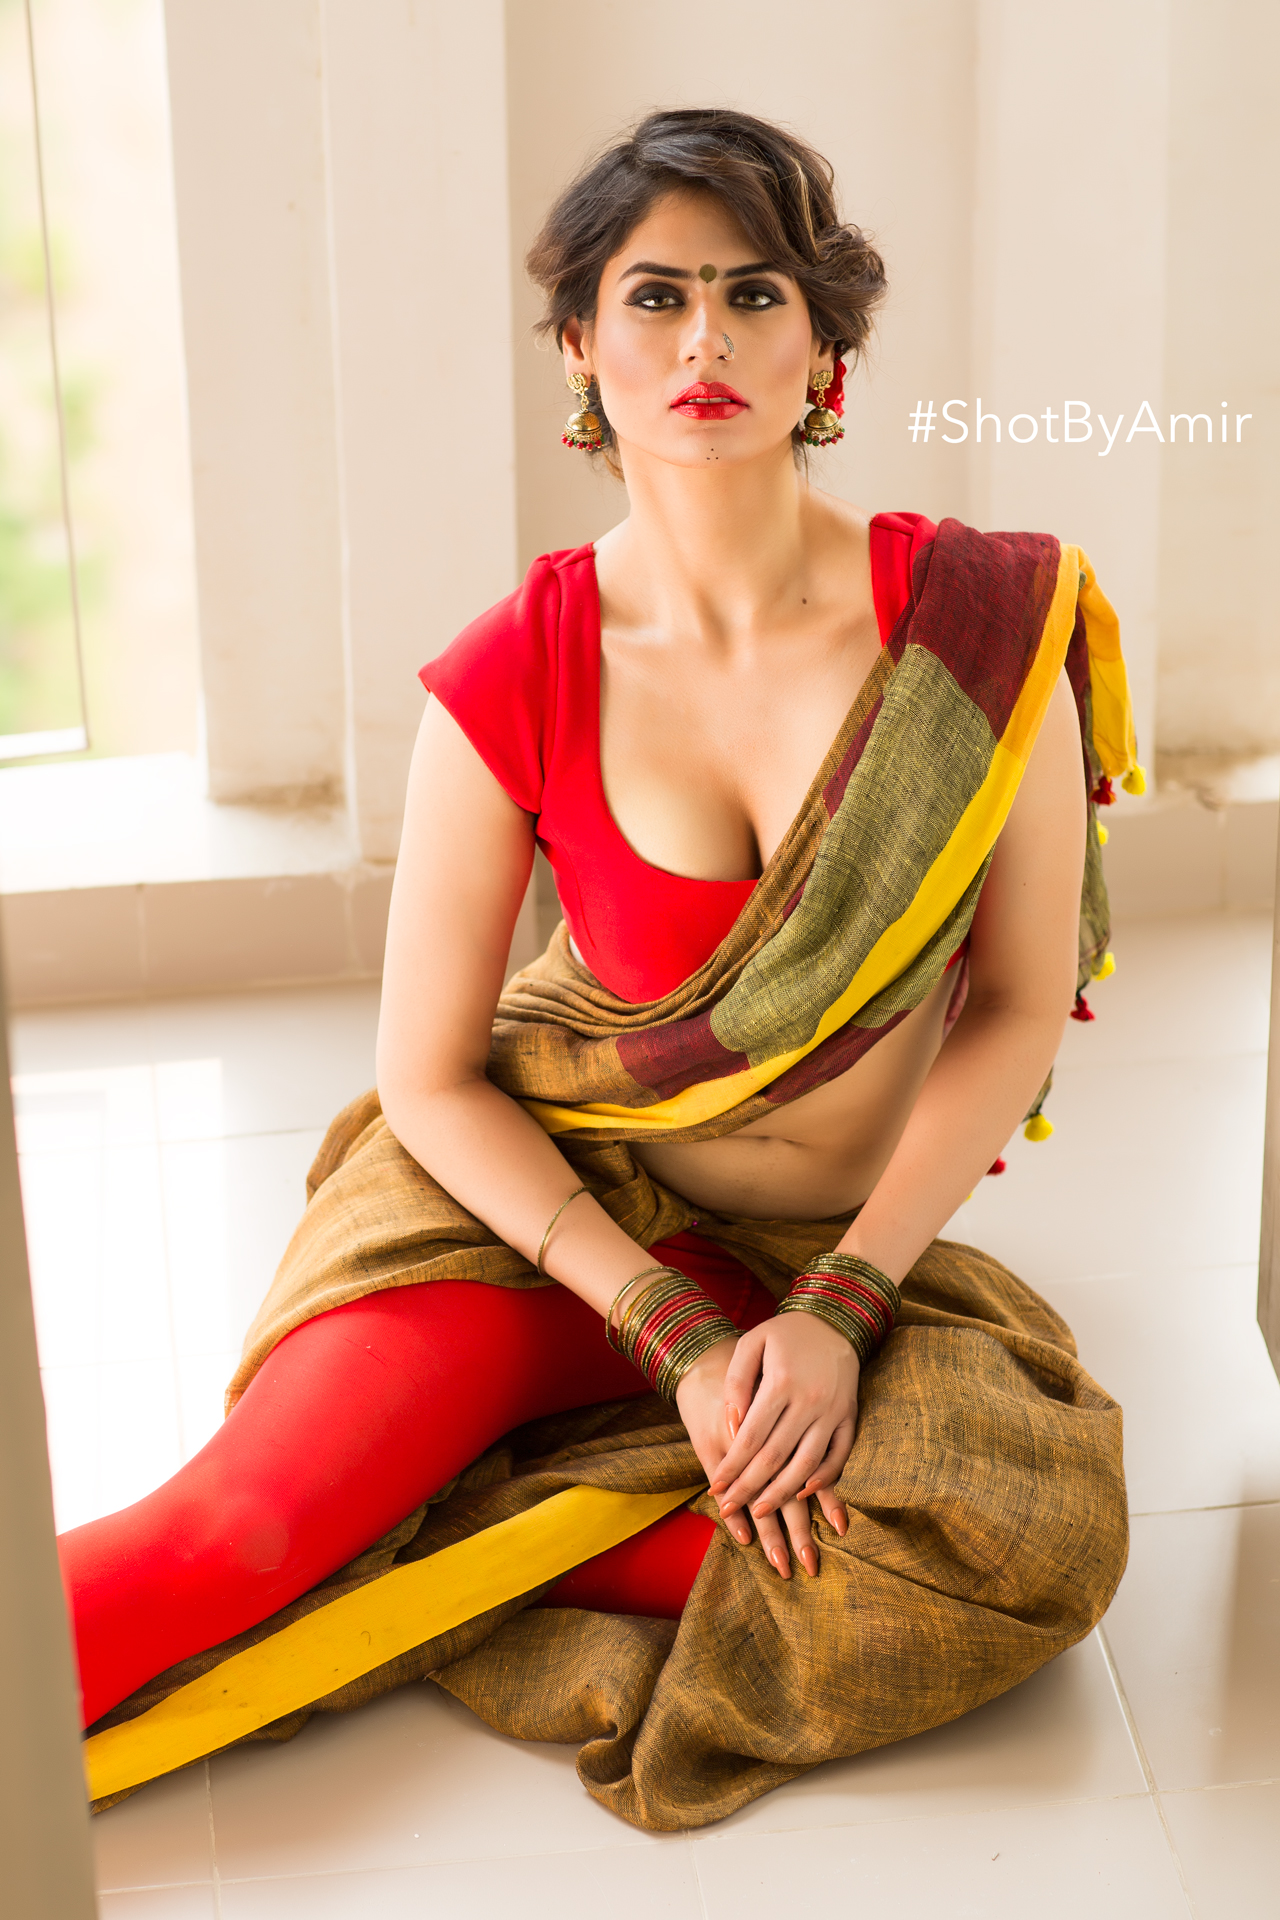 Saree Fashion Photoshoot for Look Book